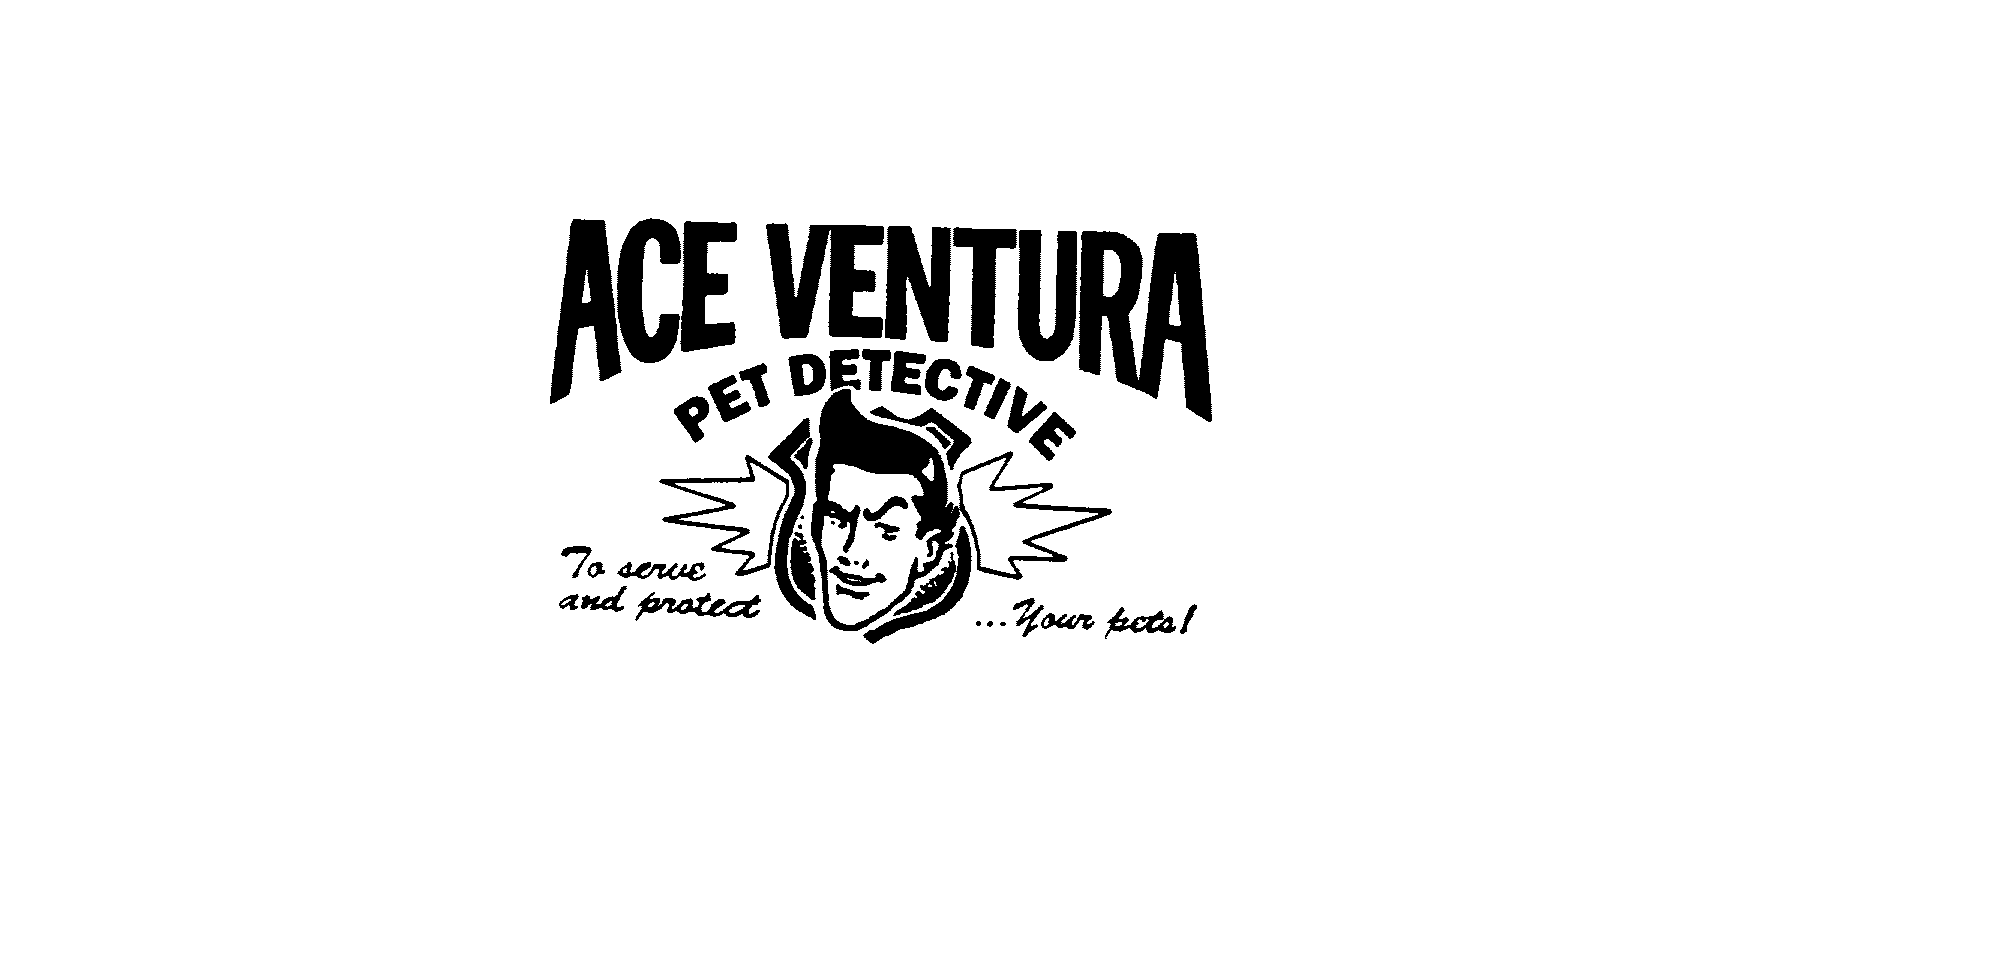 Trademark Logo ACE VENTURA PET DETECTIVE TO SERVE AND PROTECT YOUR PETS